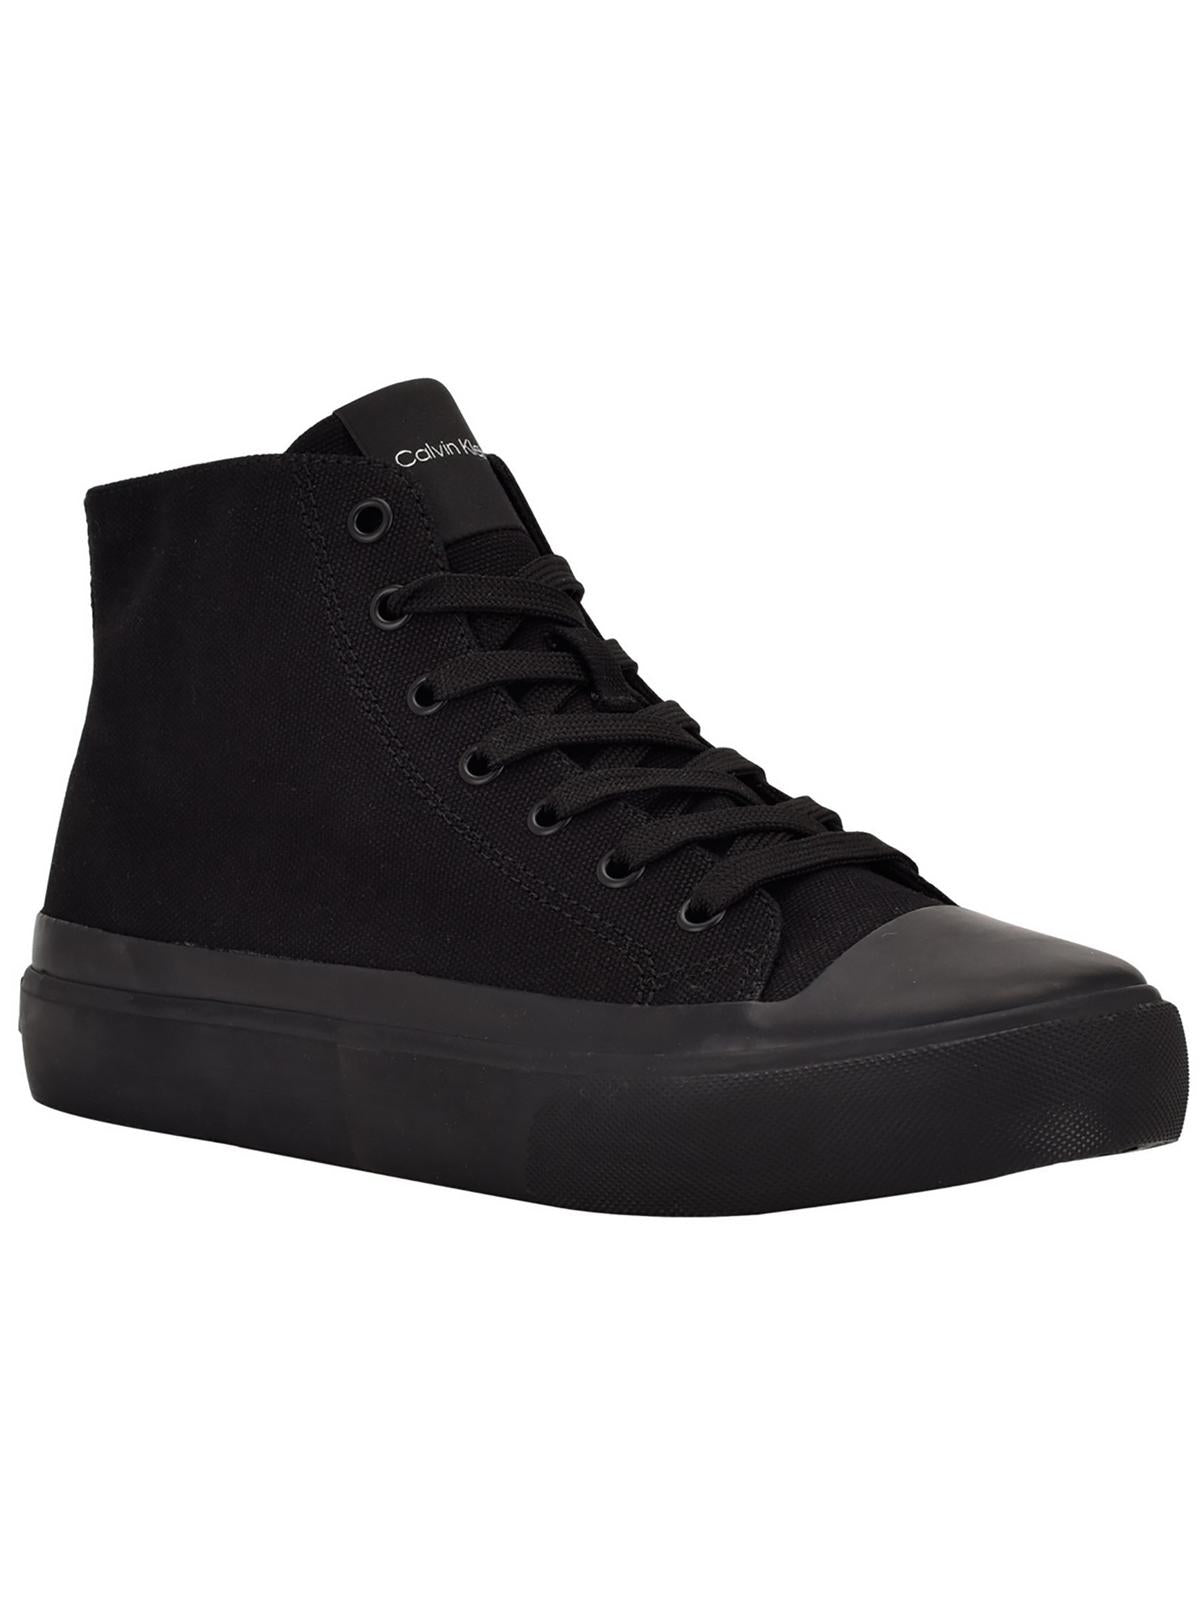 Calvin Klein Bshigh Womens Lace-up Man Made Casual And Fashion Sneakers In Black